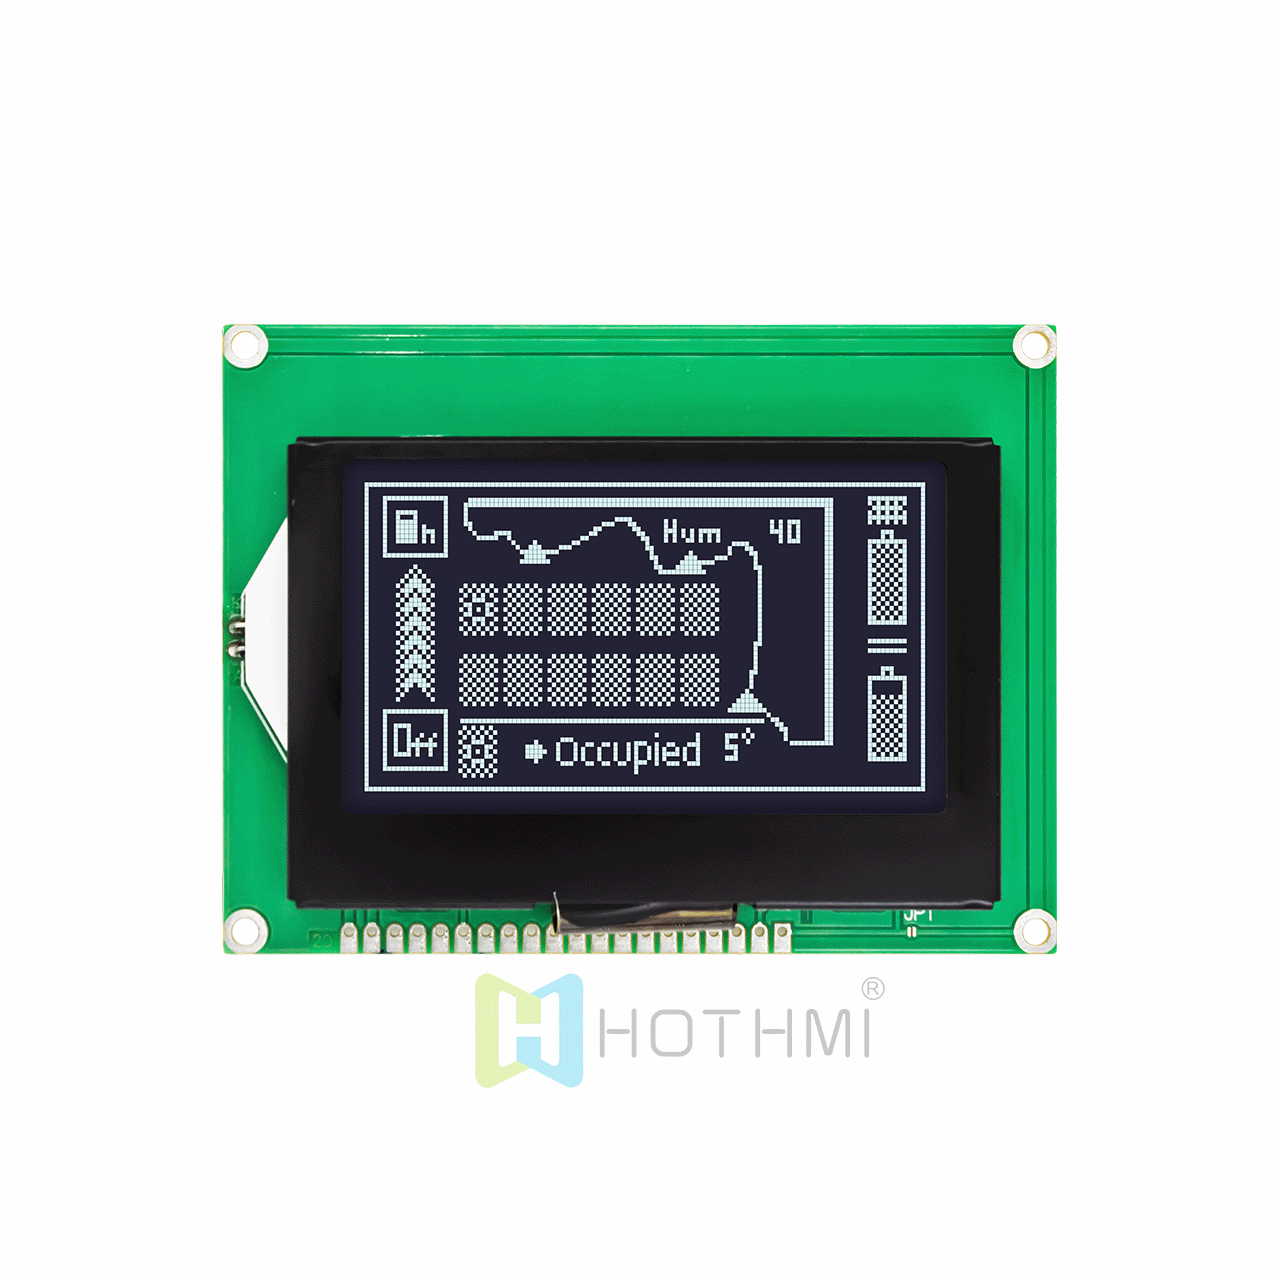 3-inch 128x64LCD graphic LCD module | 5.0v | 128X64 graphic LCD display | DFSTN negative display white backlight | ST7565R controller